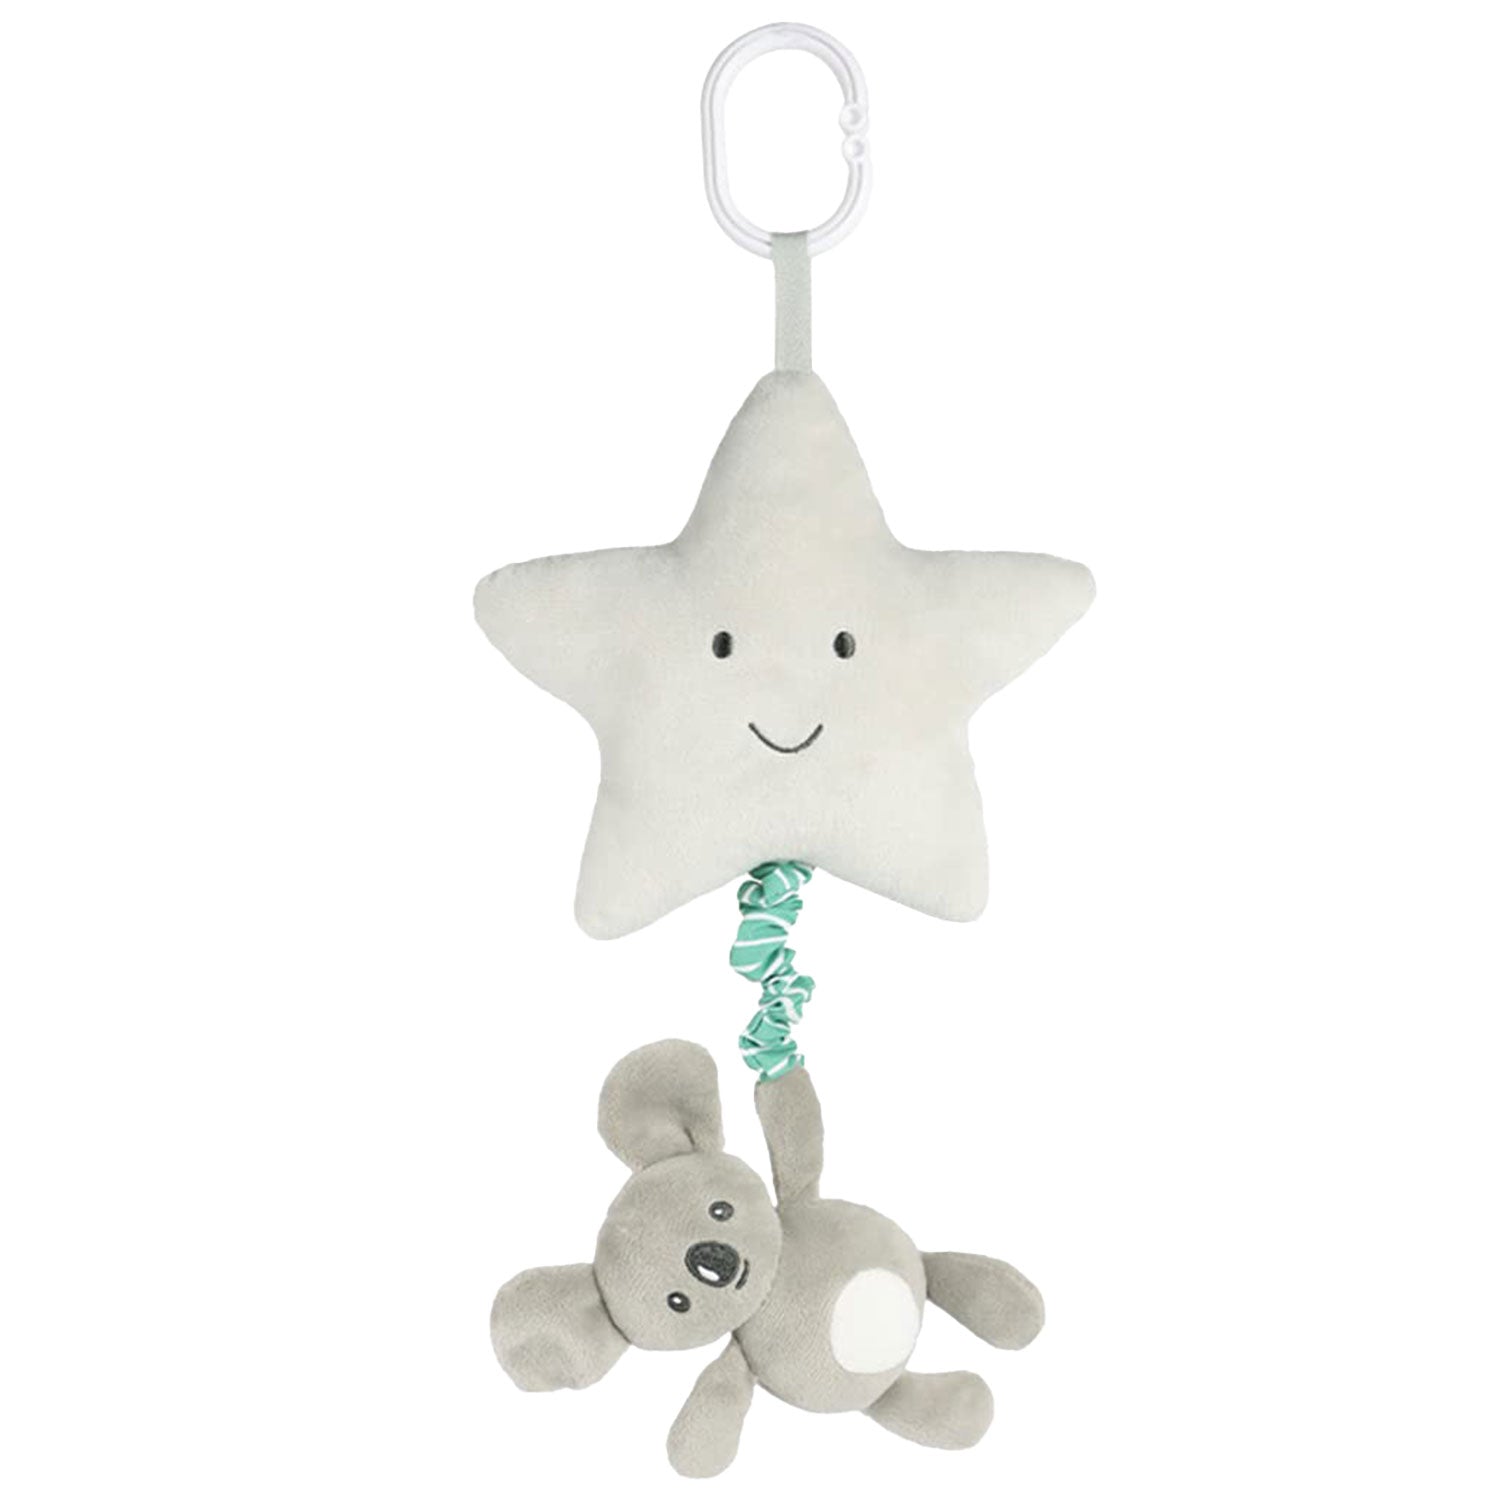 Baby Moo Smiling Star Hanging Musical Pulling Toy - Grey